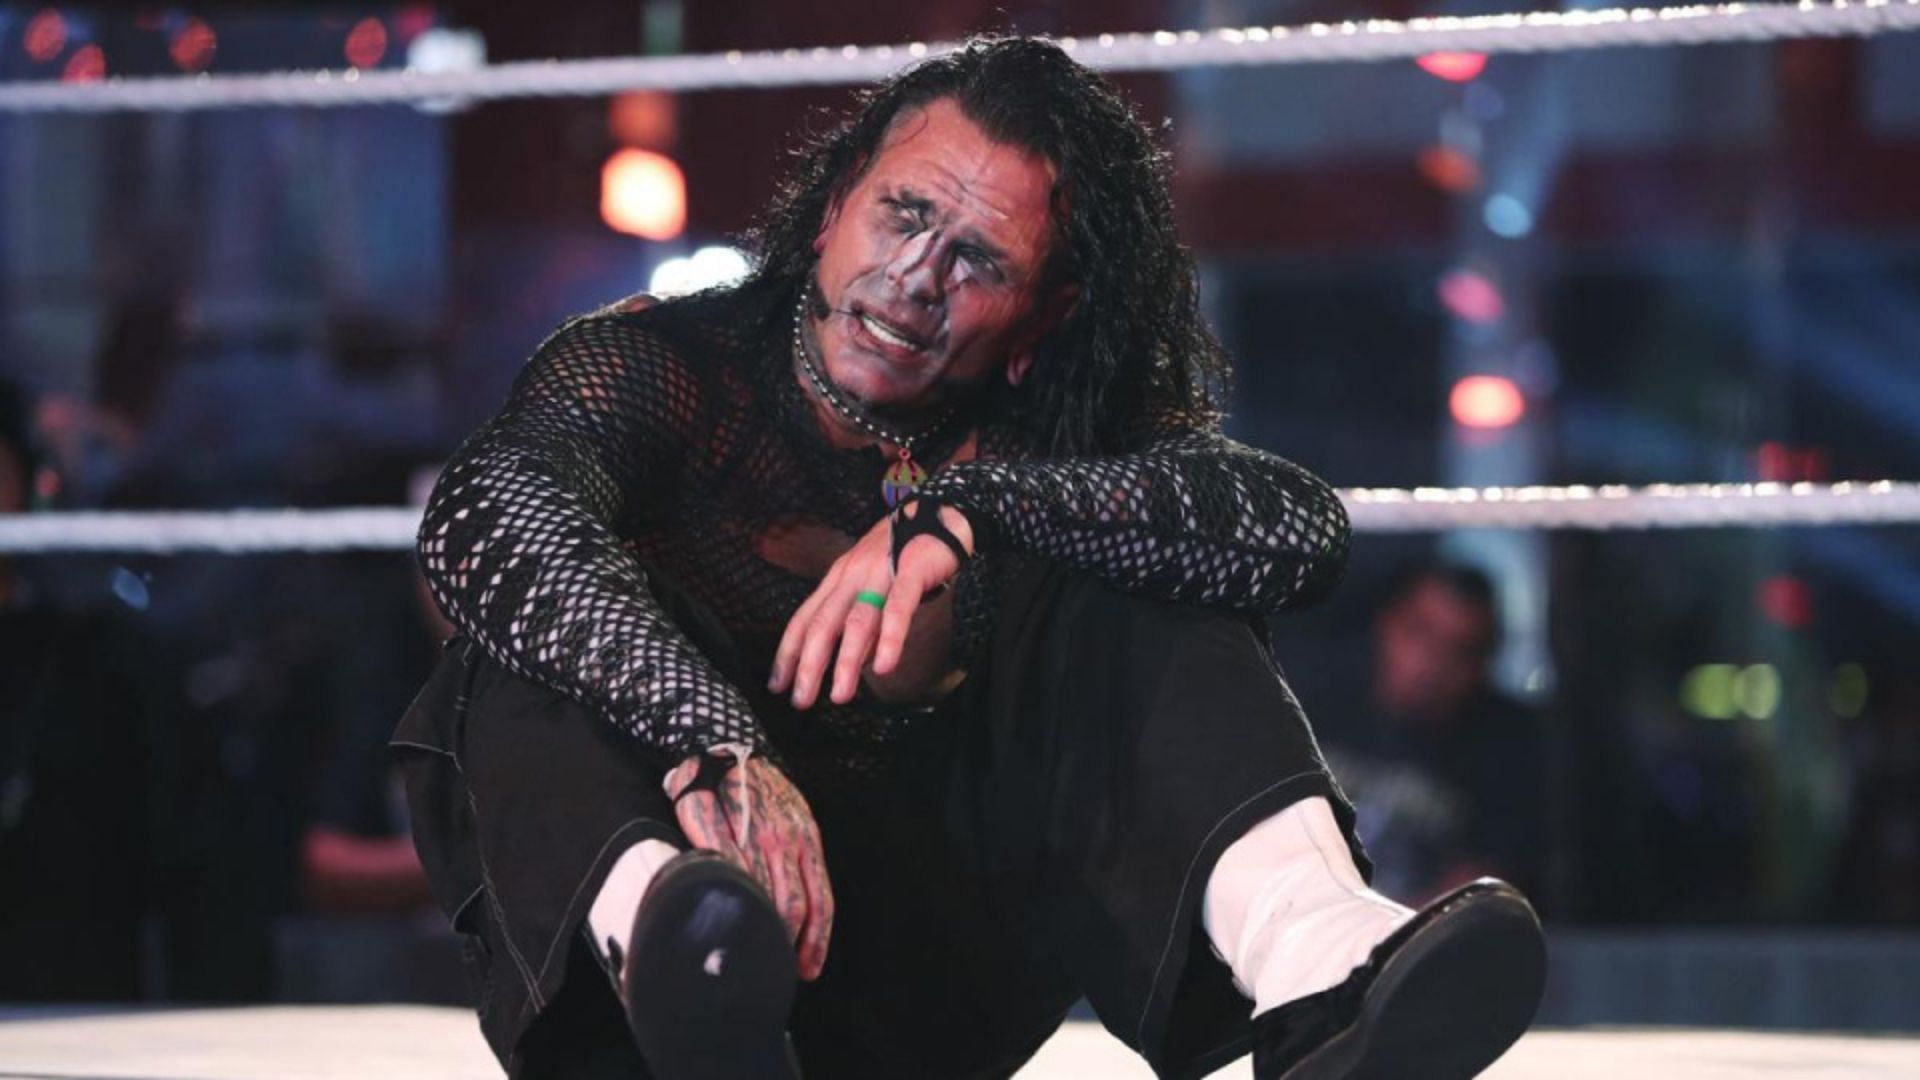 Jeff Hardy is a former World Heavyweight Champion who is now with AEW